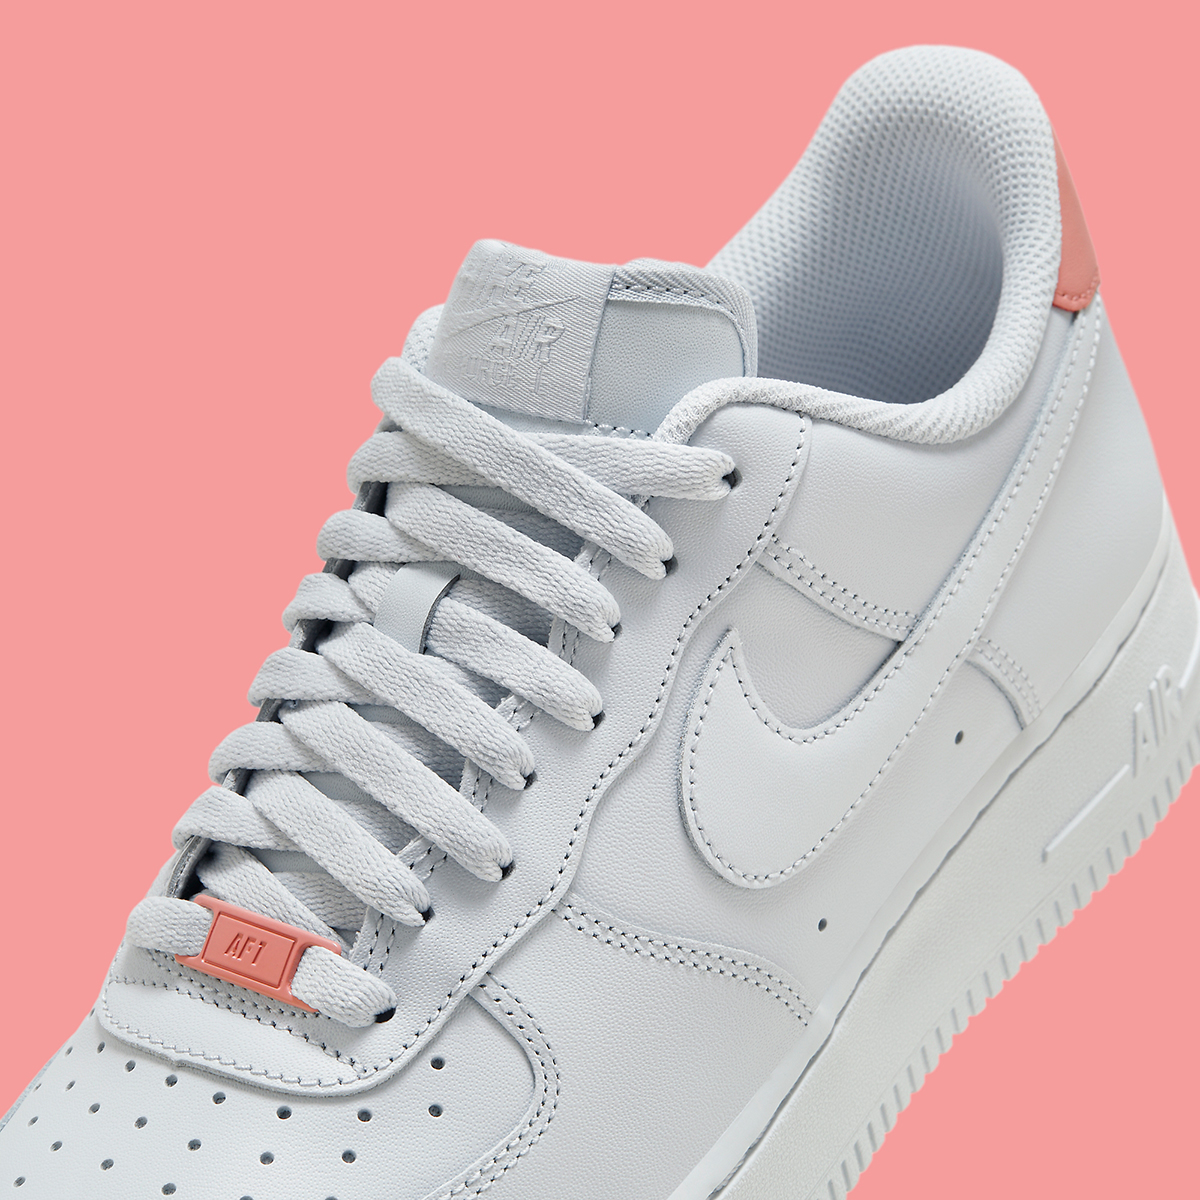 Nike Air Force 1 Low White Dusty Rose Hf0729 001 9